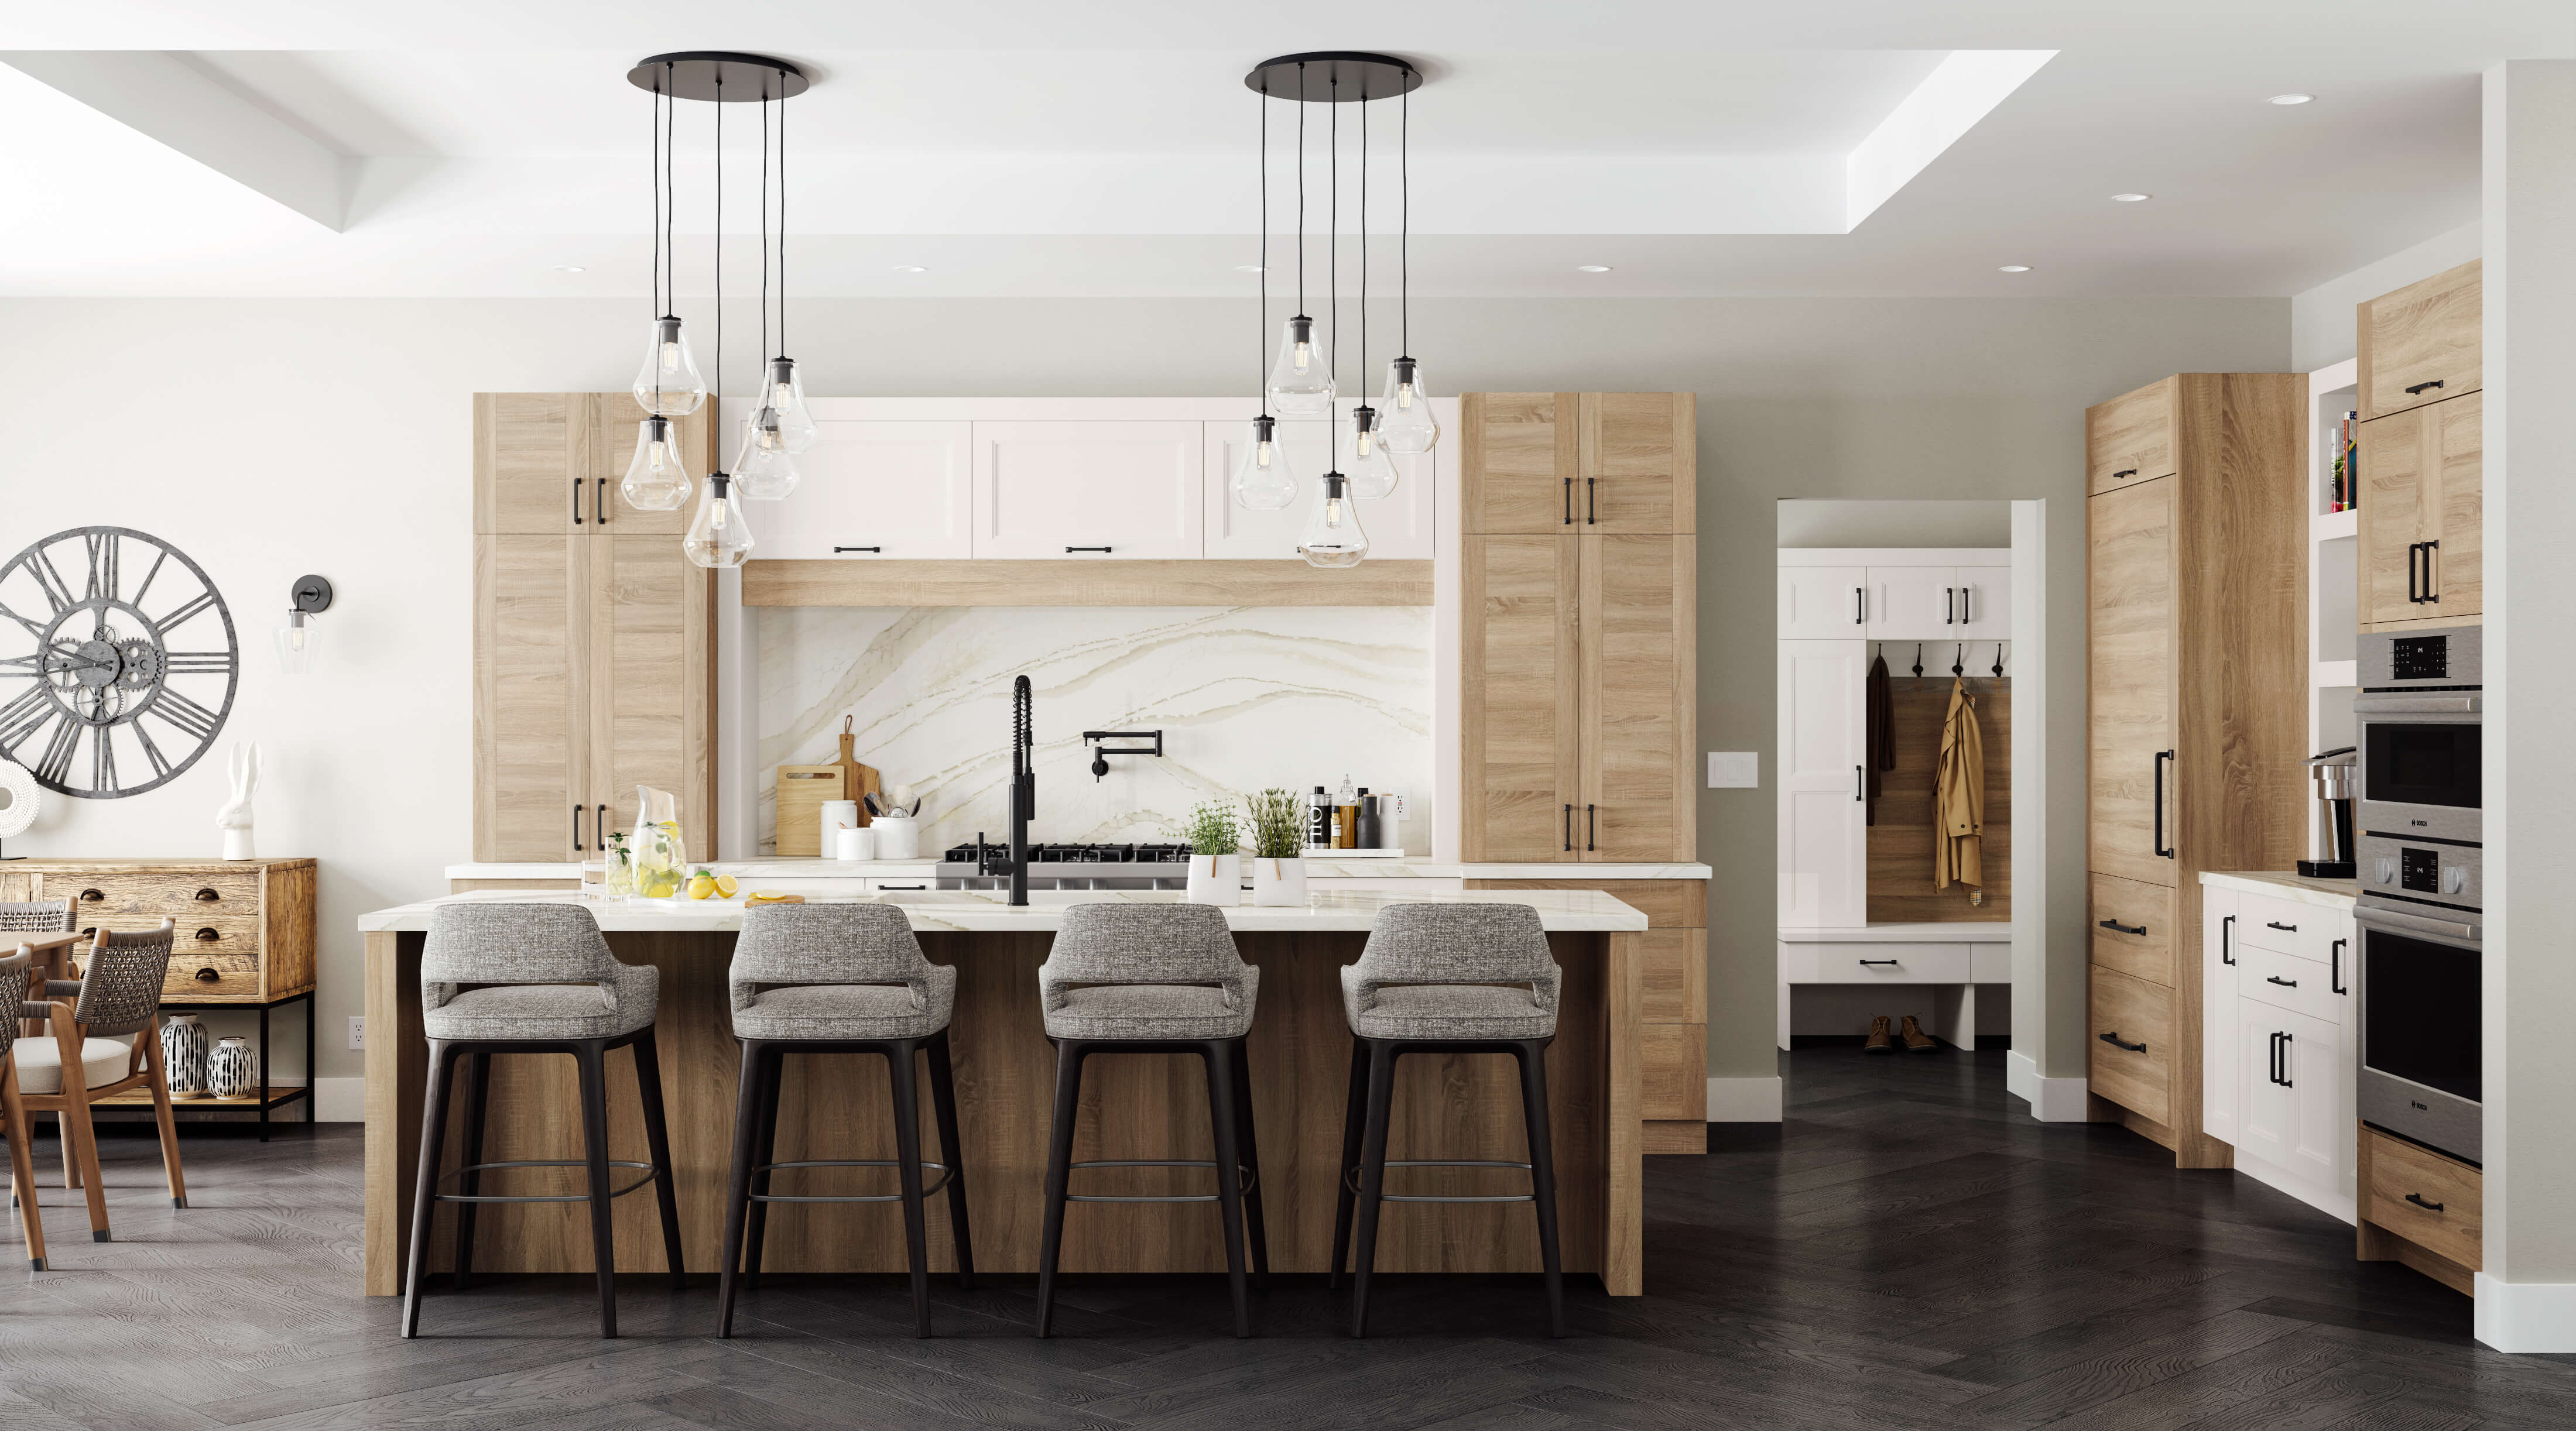 A modern Scandinavian style kitchen design with off-white painted cabinets paired with textured Oak cabinets with wood plank-like doors. The Scandi styled kitchen island has seating for four guests and a kitchen sink with a spacious clean-up zone.